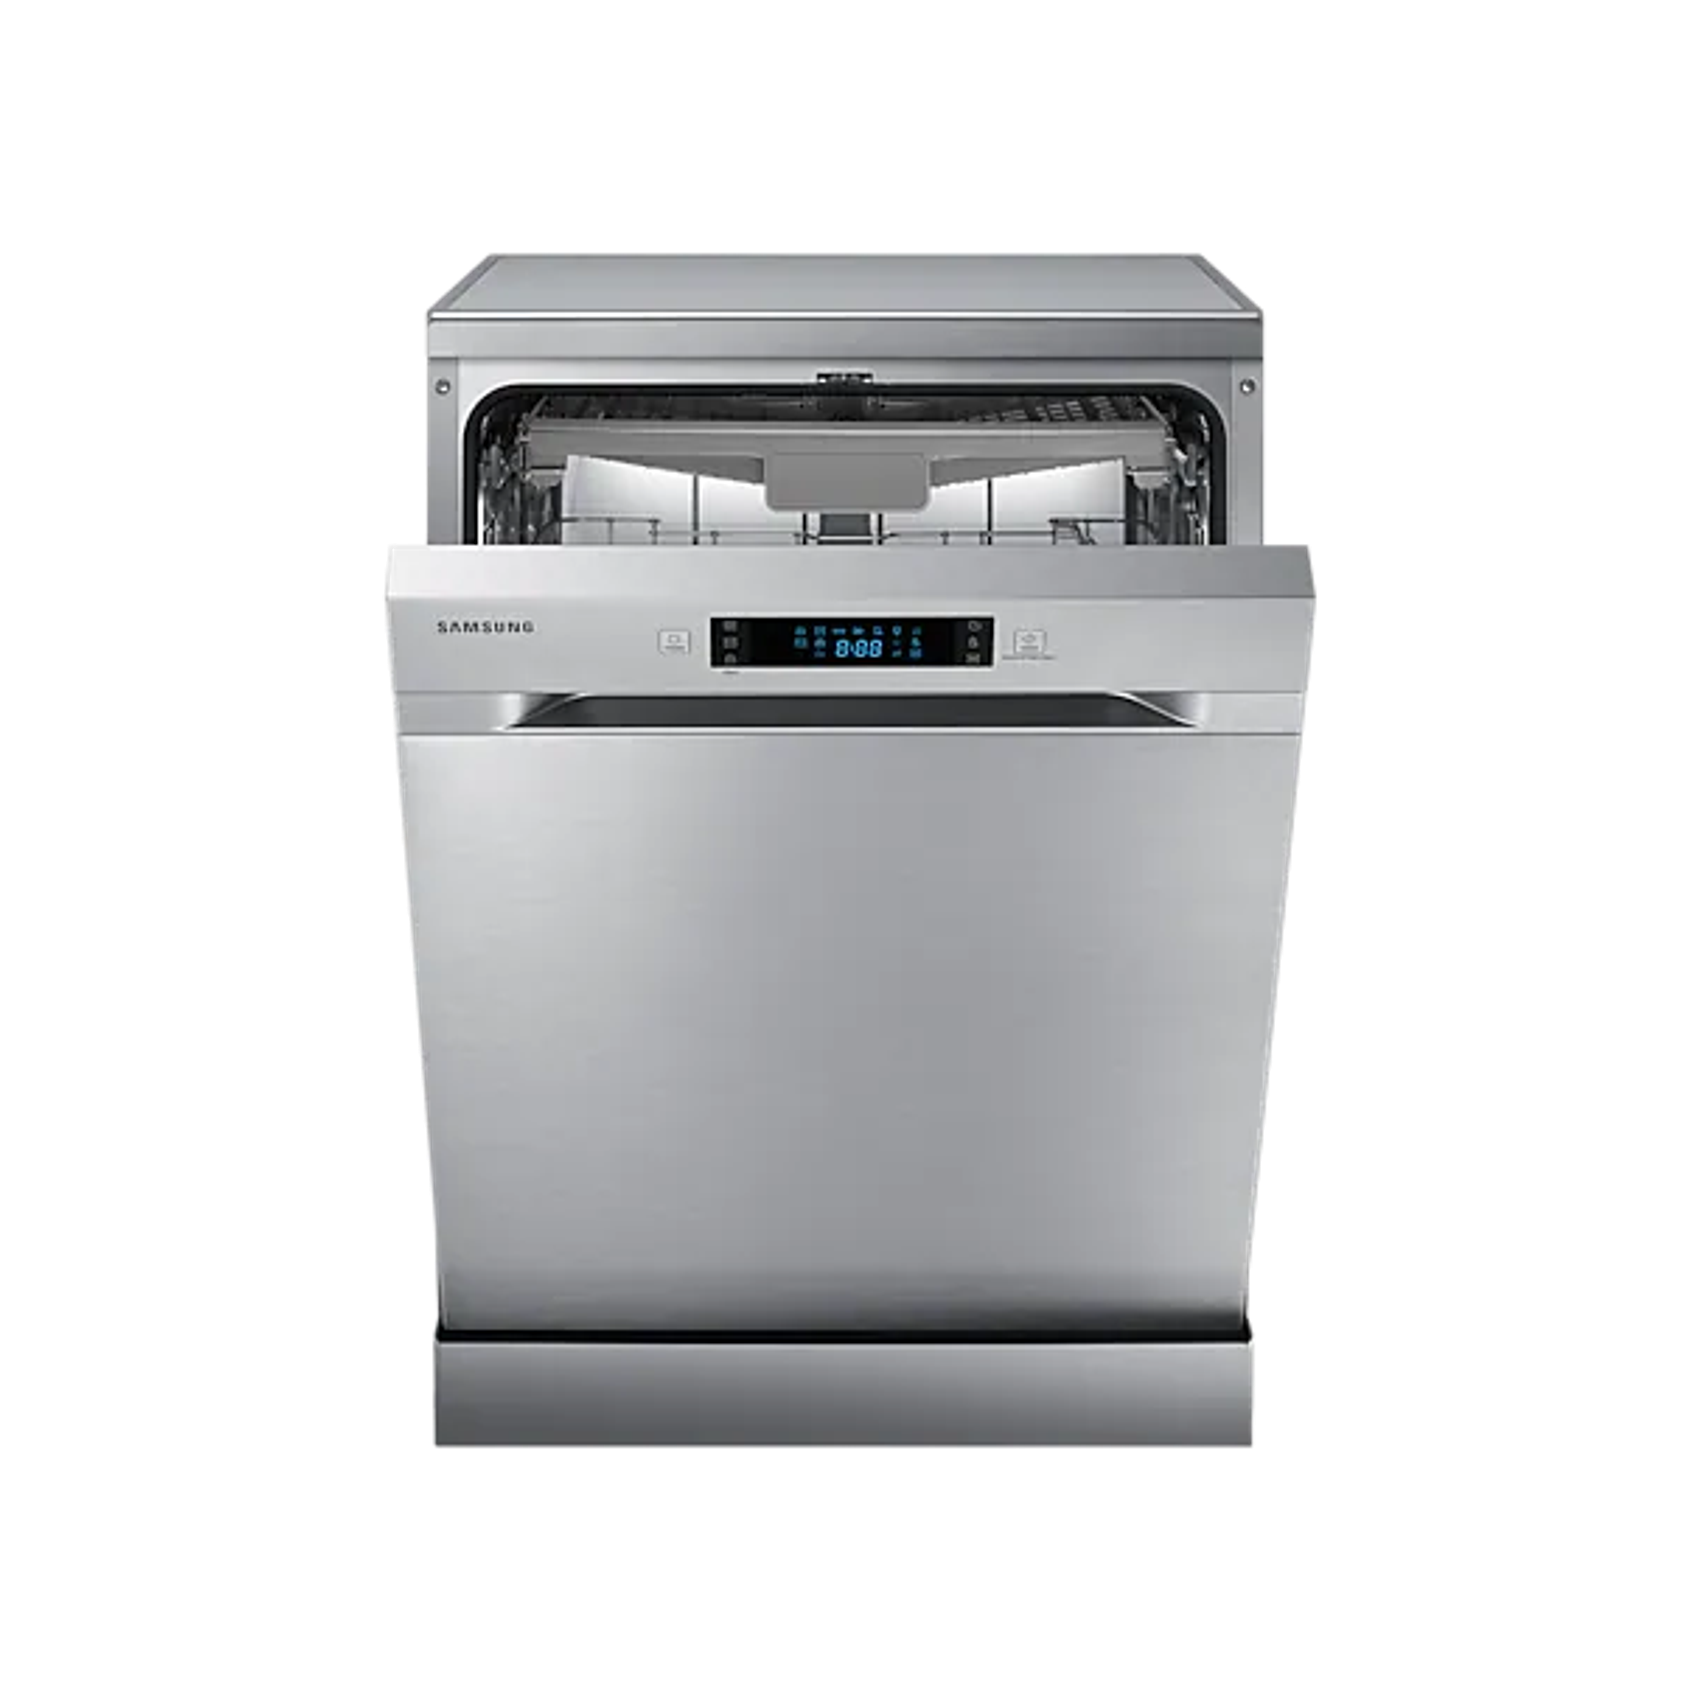 Samsung 14 Place Dishwasher with Wide Led Display - Silver (Photo: 7)